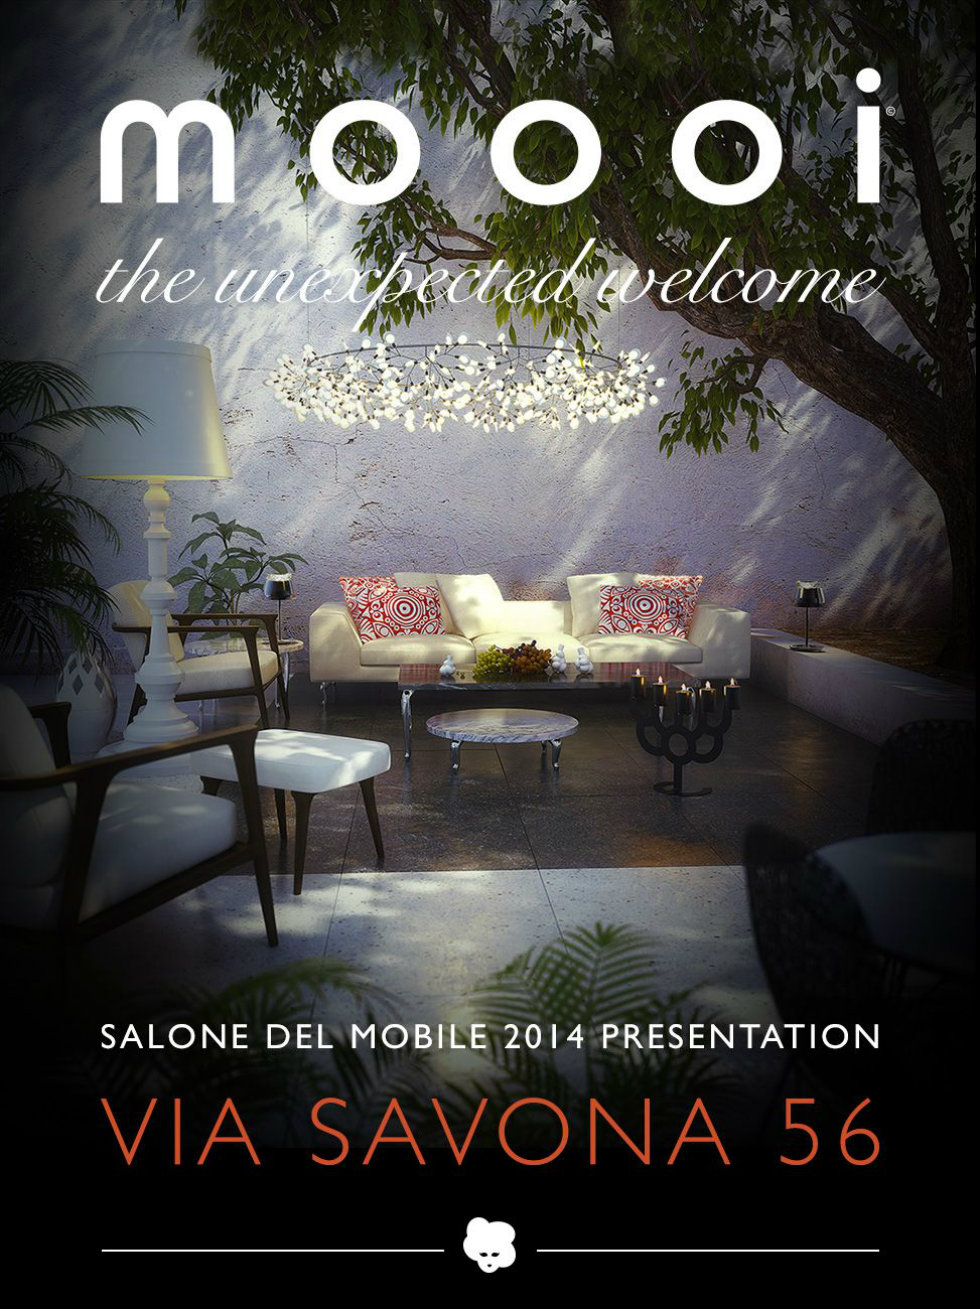 " MOOOI Unexpected Welcome at Via Savonna, Fuorisalone"